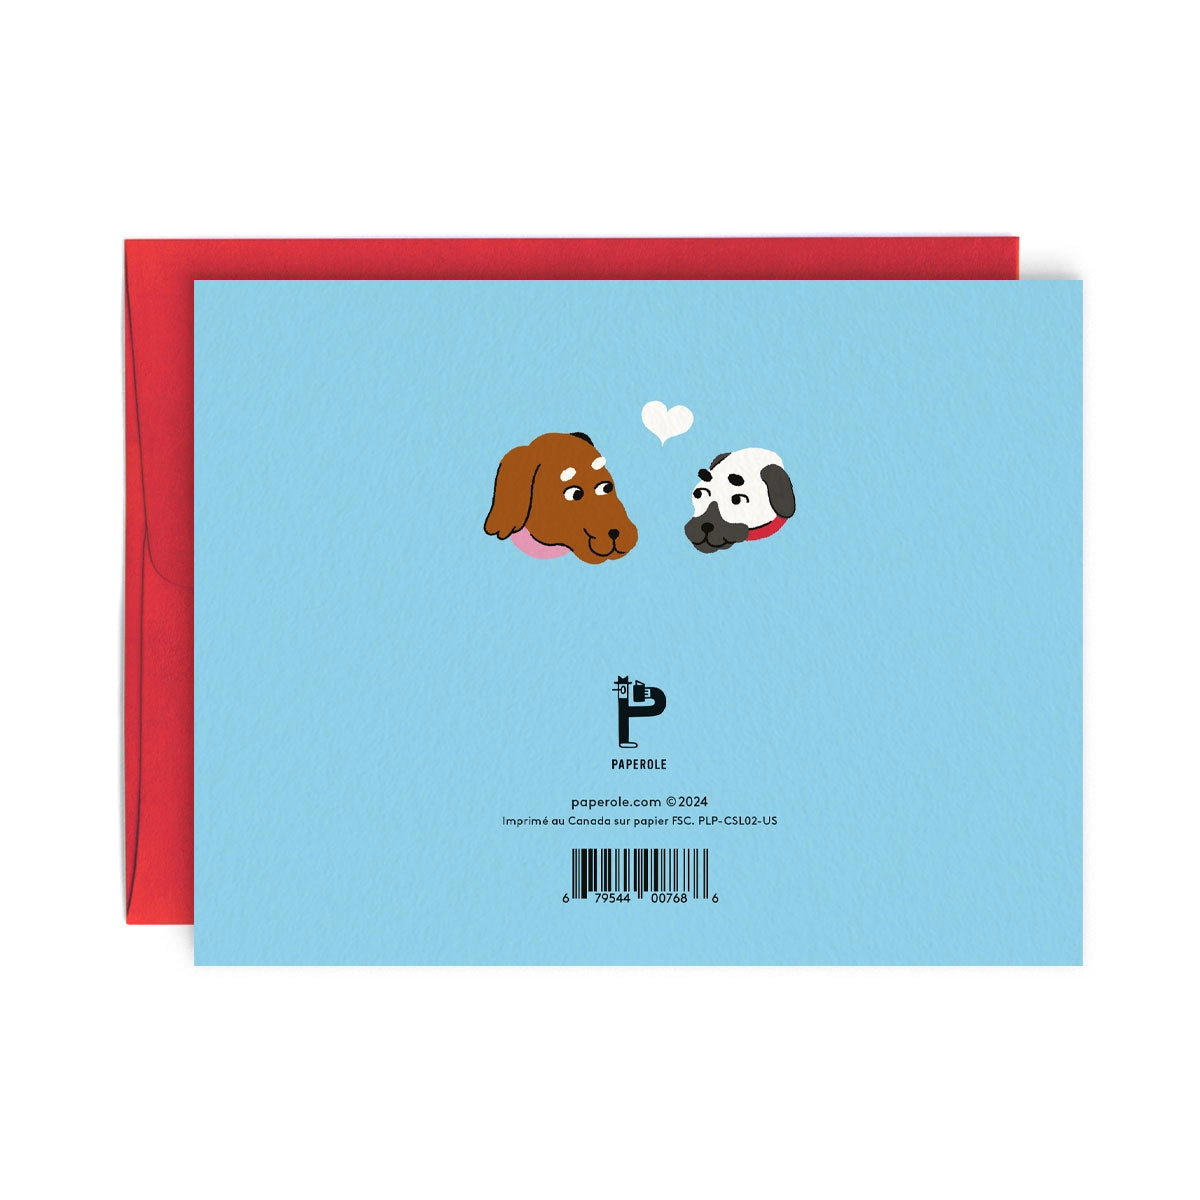 Us Greeting Card · Paperole